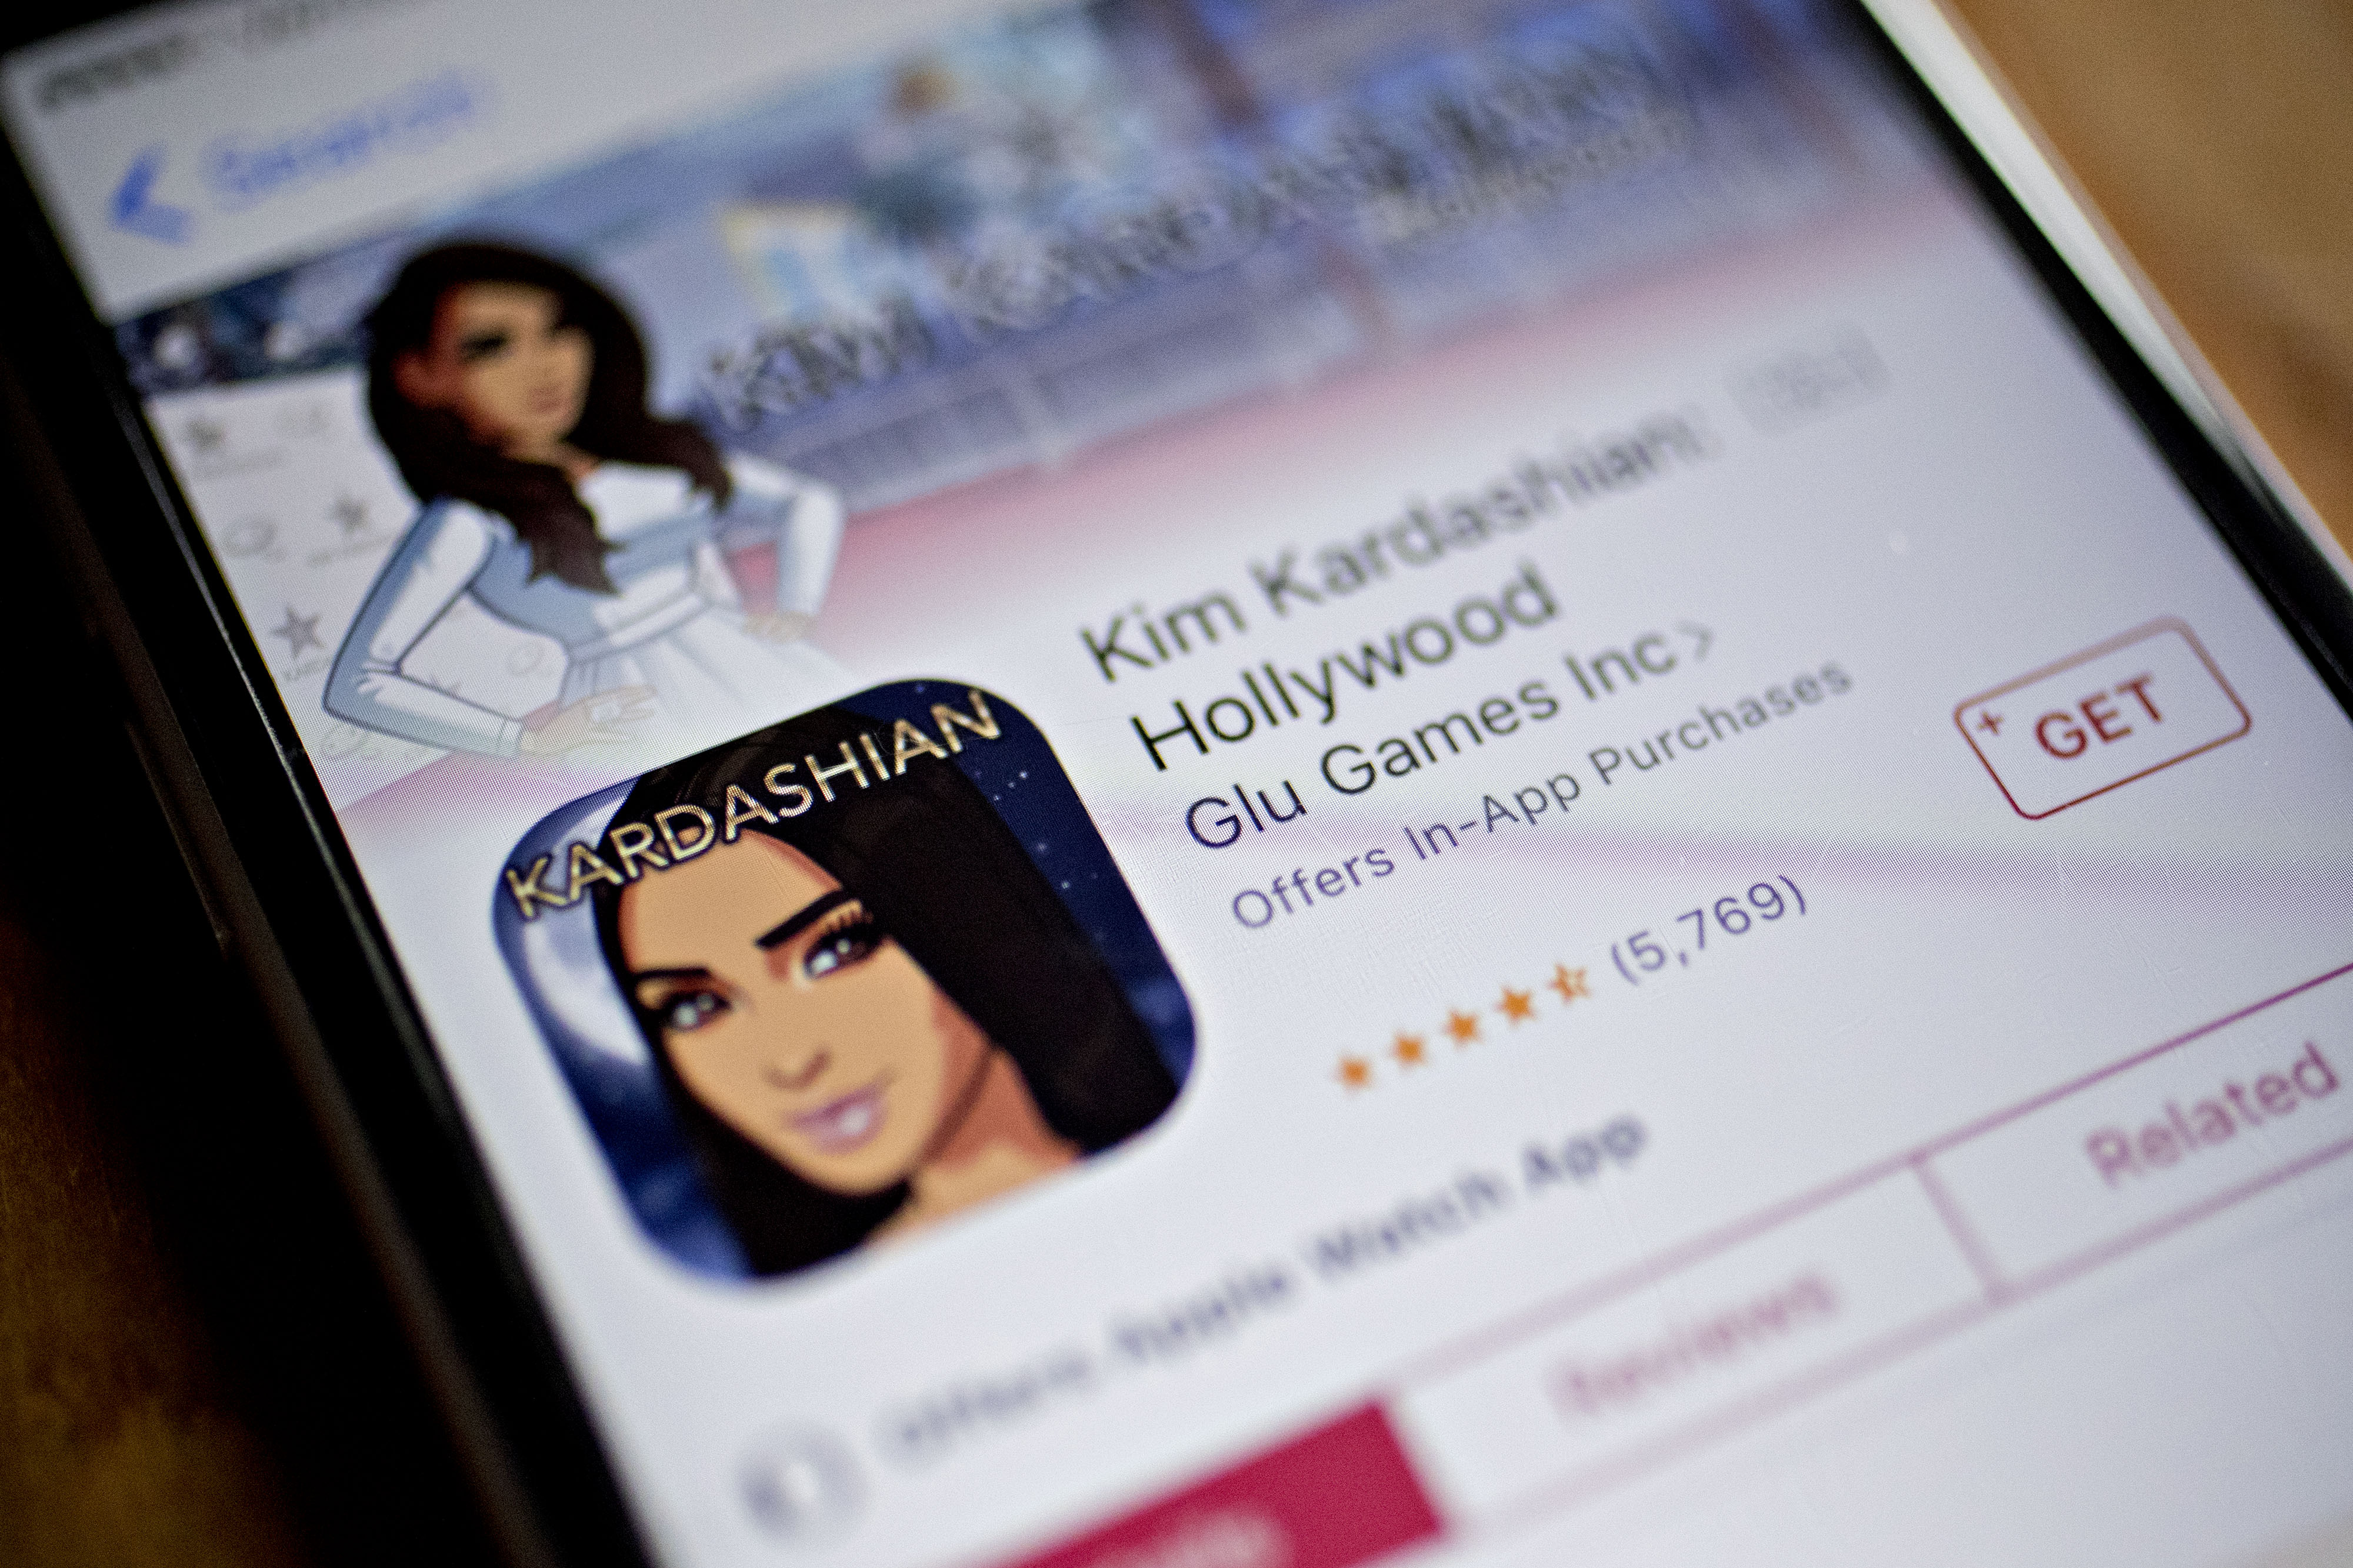 A photograph of a phone with the Kim Kardashian: Hollywood mobile store page pulled up.